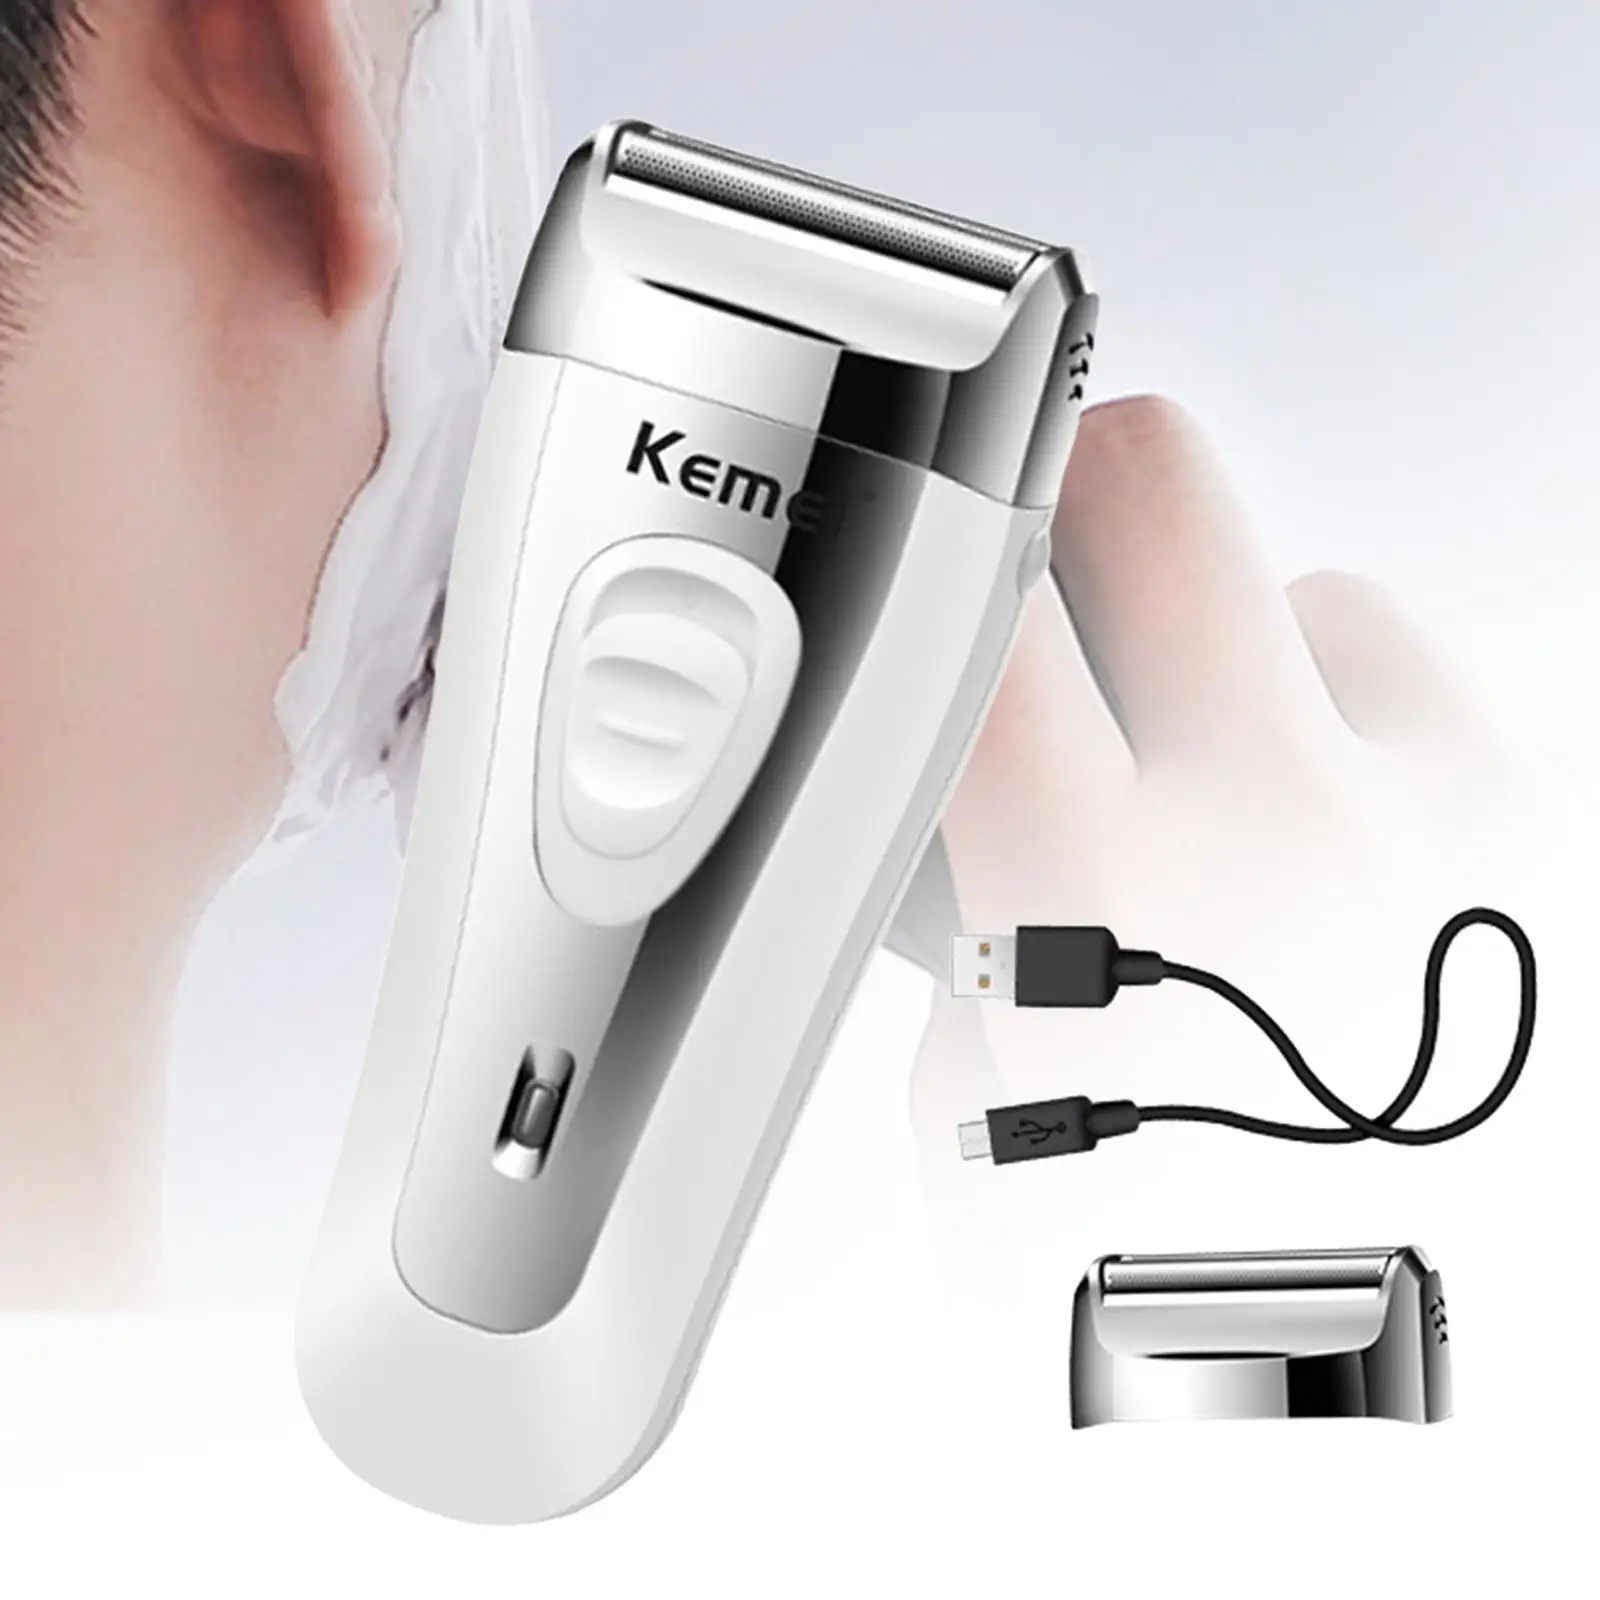 Electric Shaver Razor Professional Rechargeable Haircutting Kit for Men Clipping, Trimming